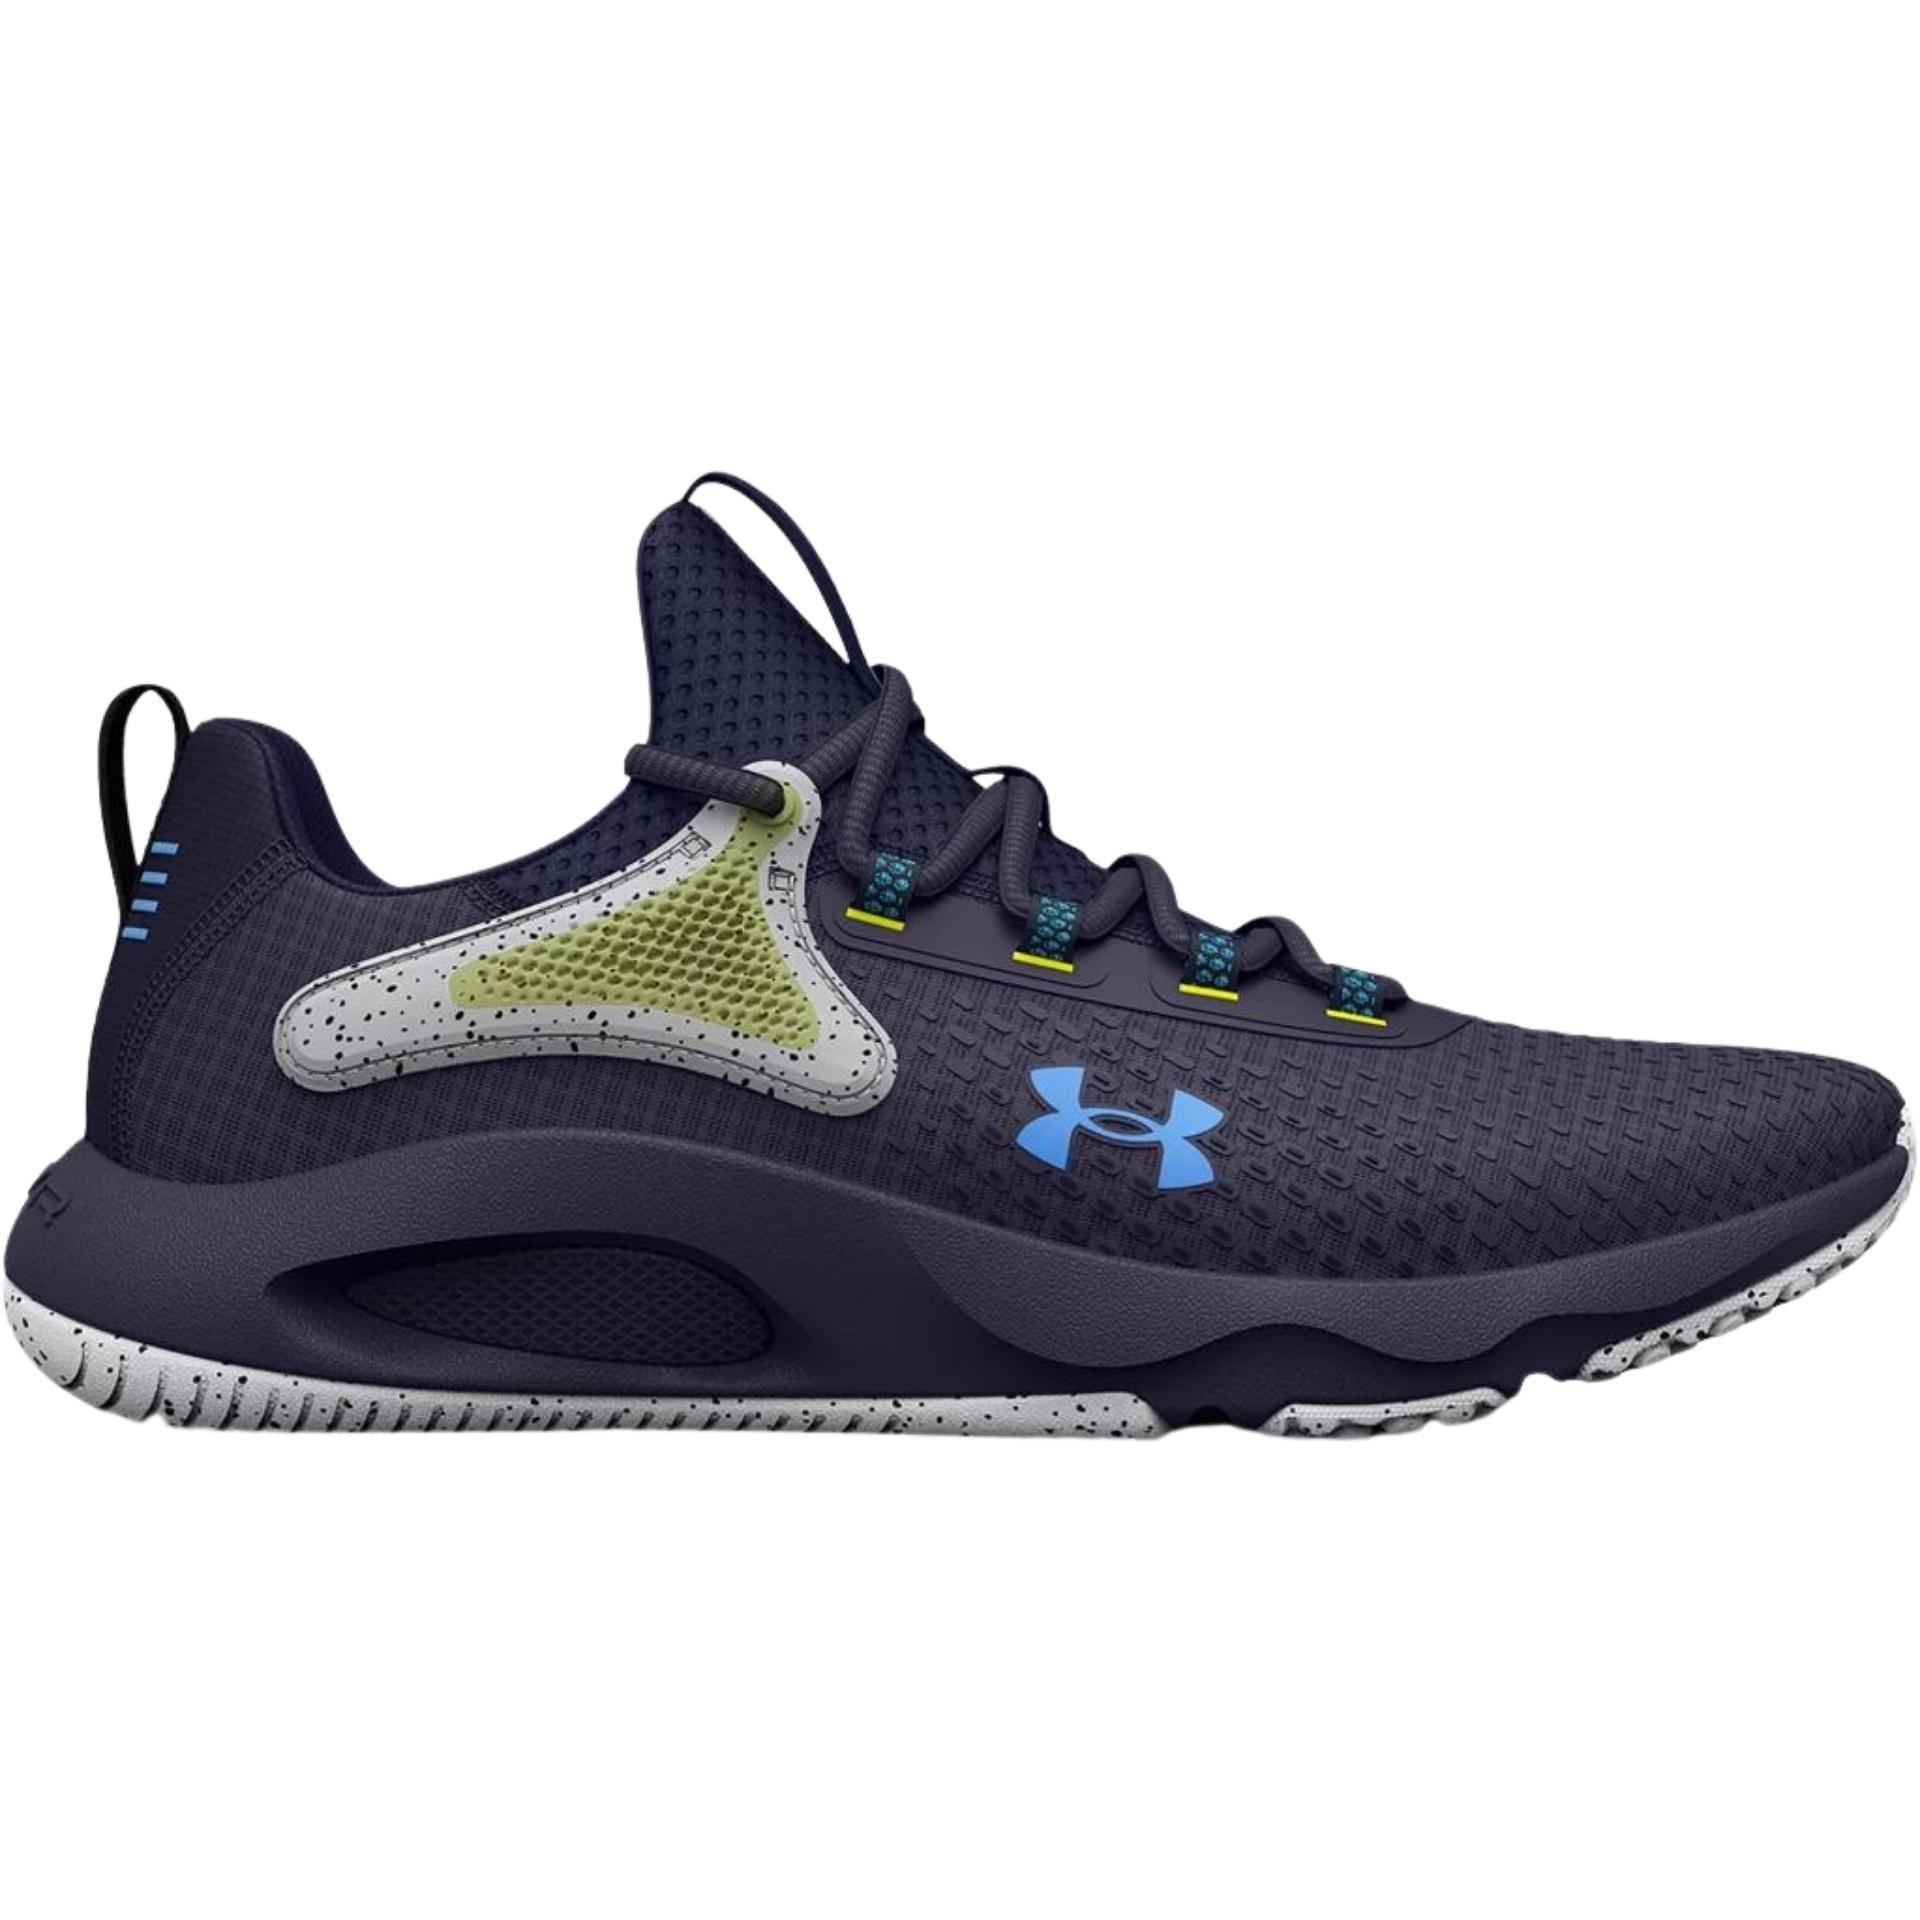 Under Armour Men's HOVR Rise 4 Training Shoes